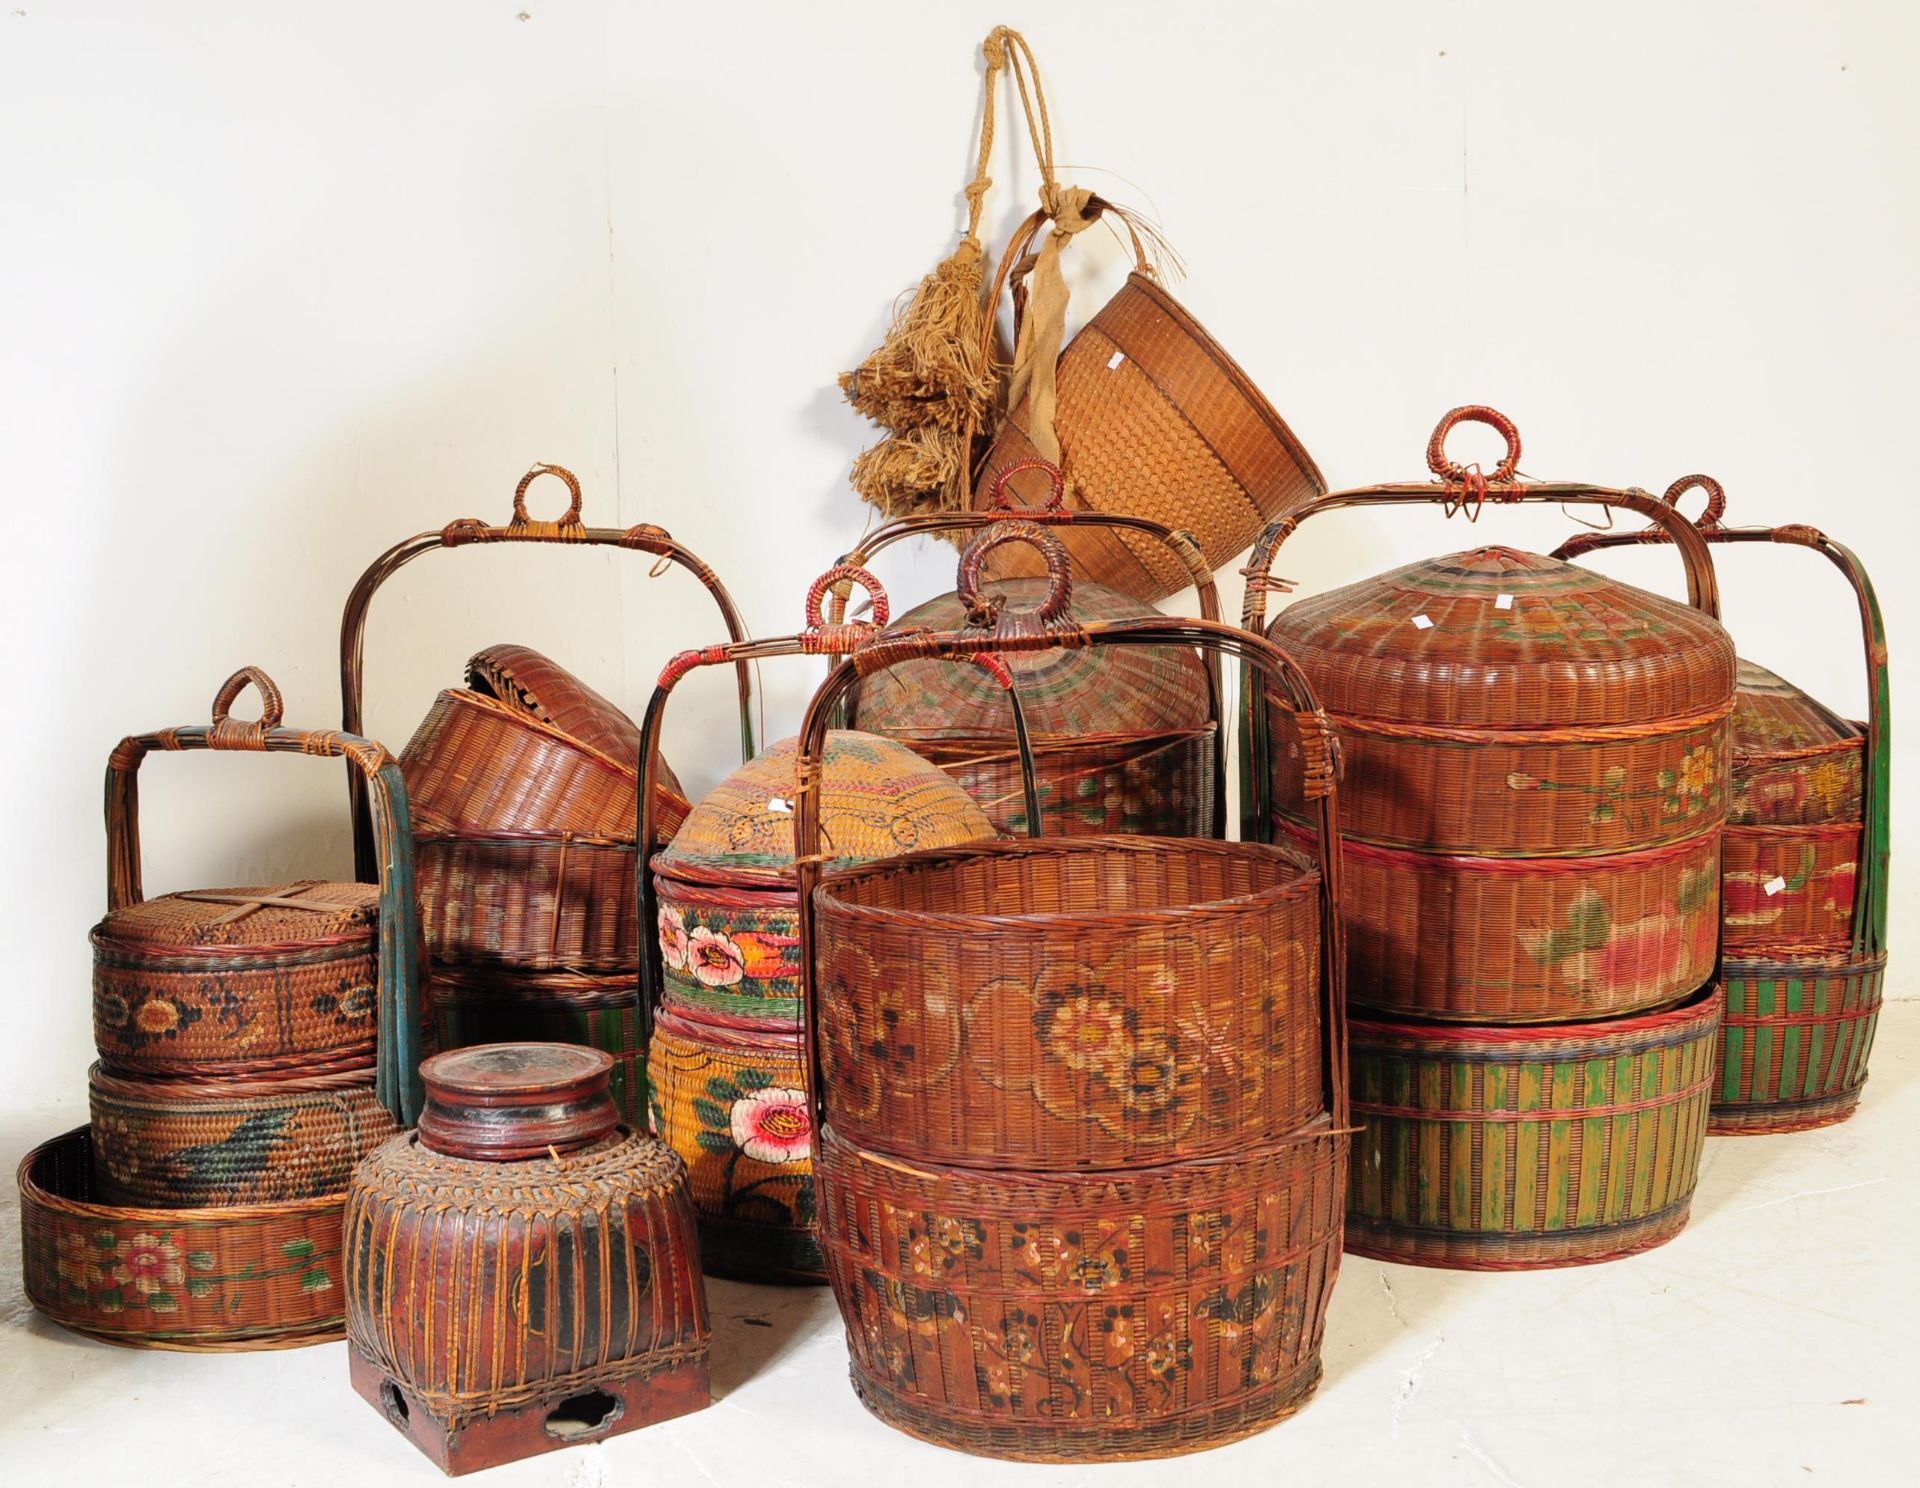 COLLECTION OF APPROXIMATELY ELEVEN CHINESE WOVEN BASKETS